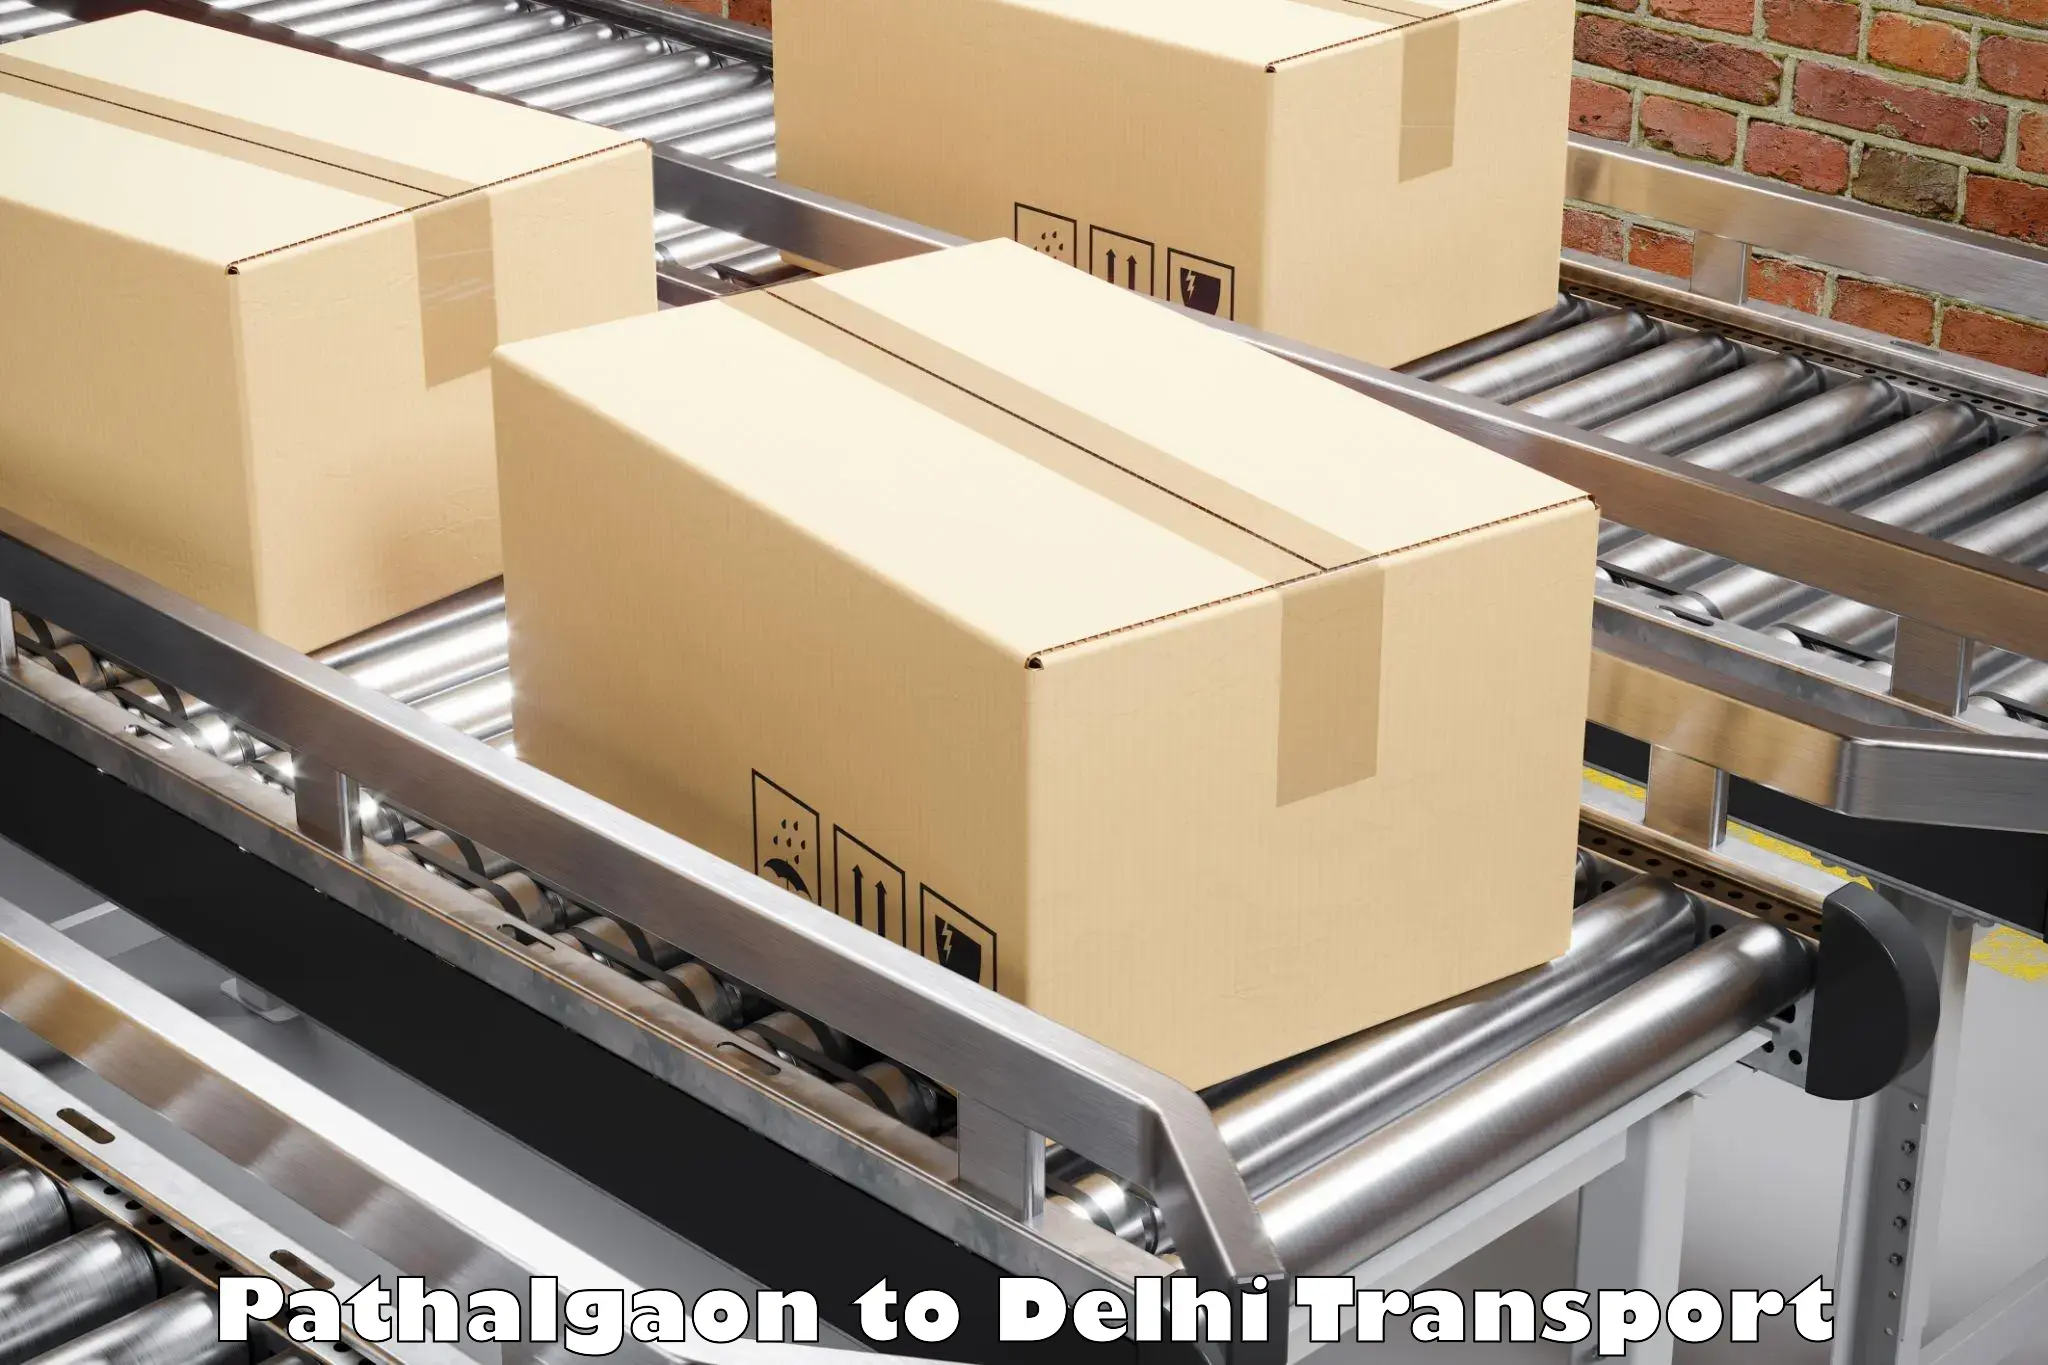 Daily transport service Pathalgaon to NCR